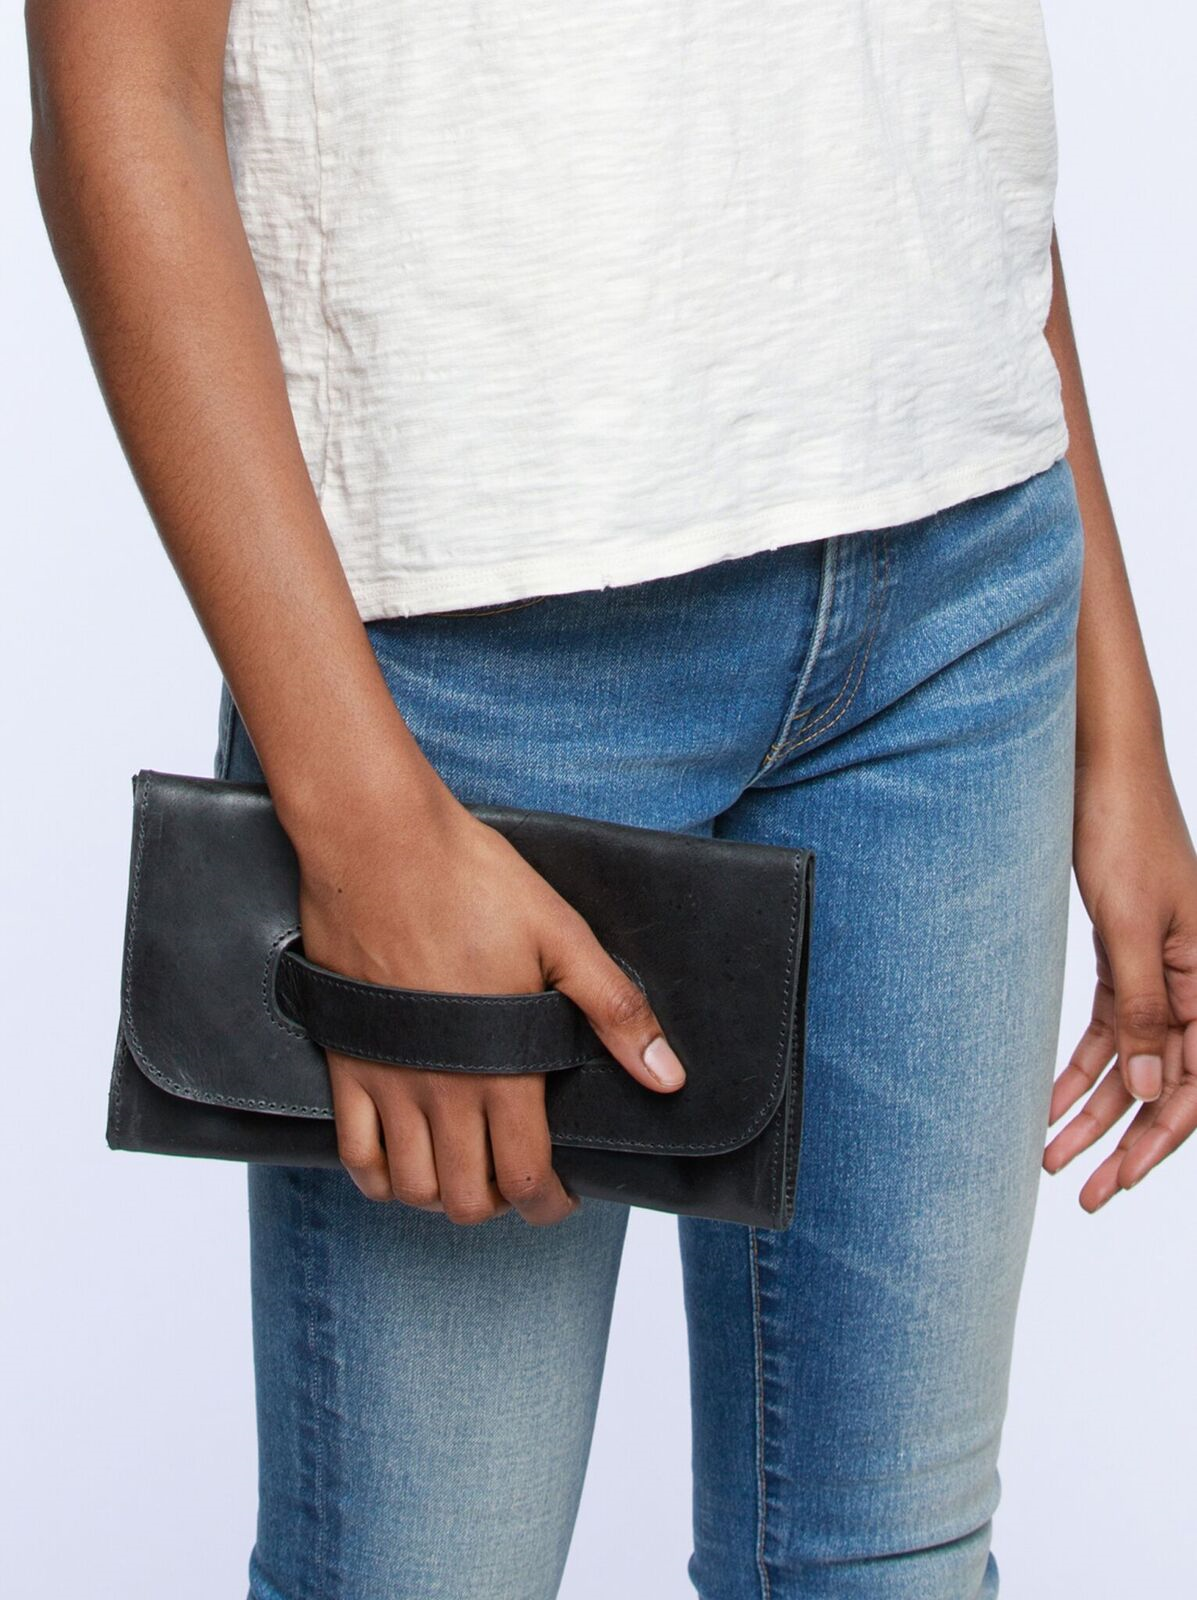 Able Mare Handle Clutch - Black